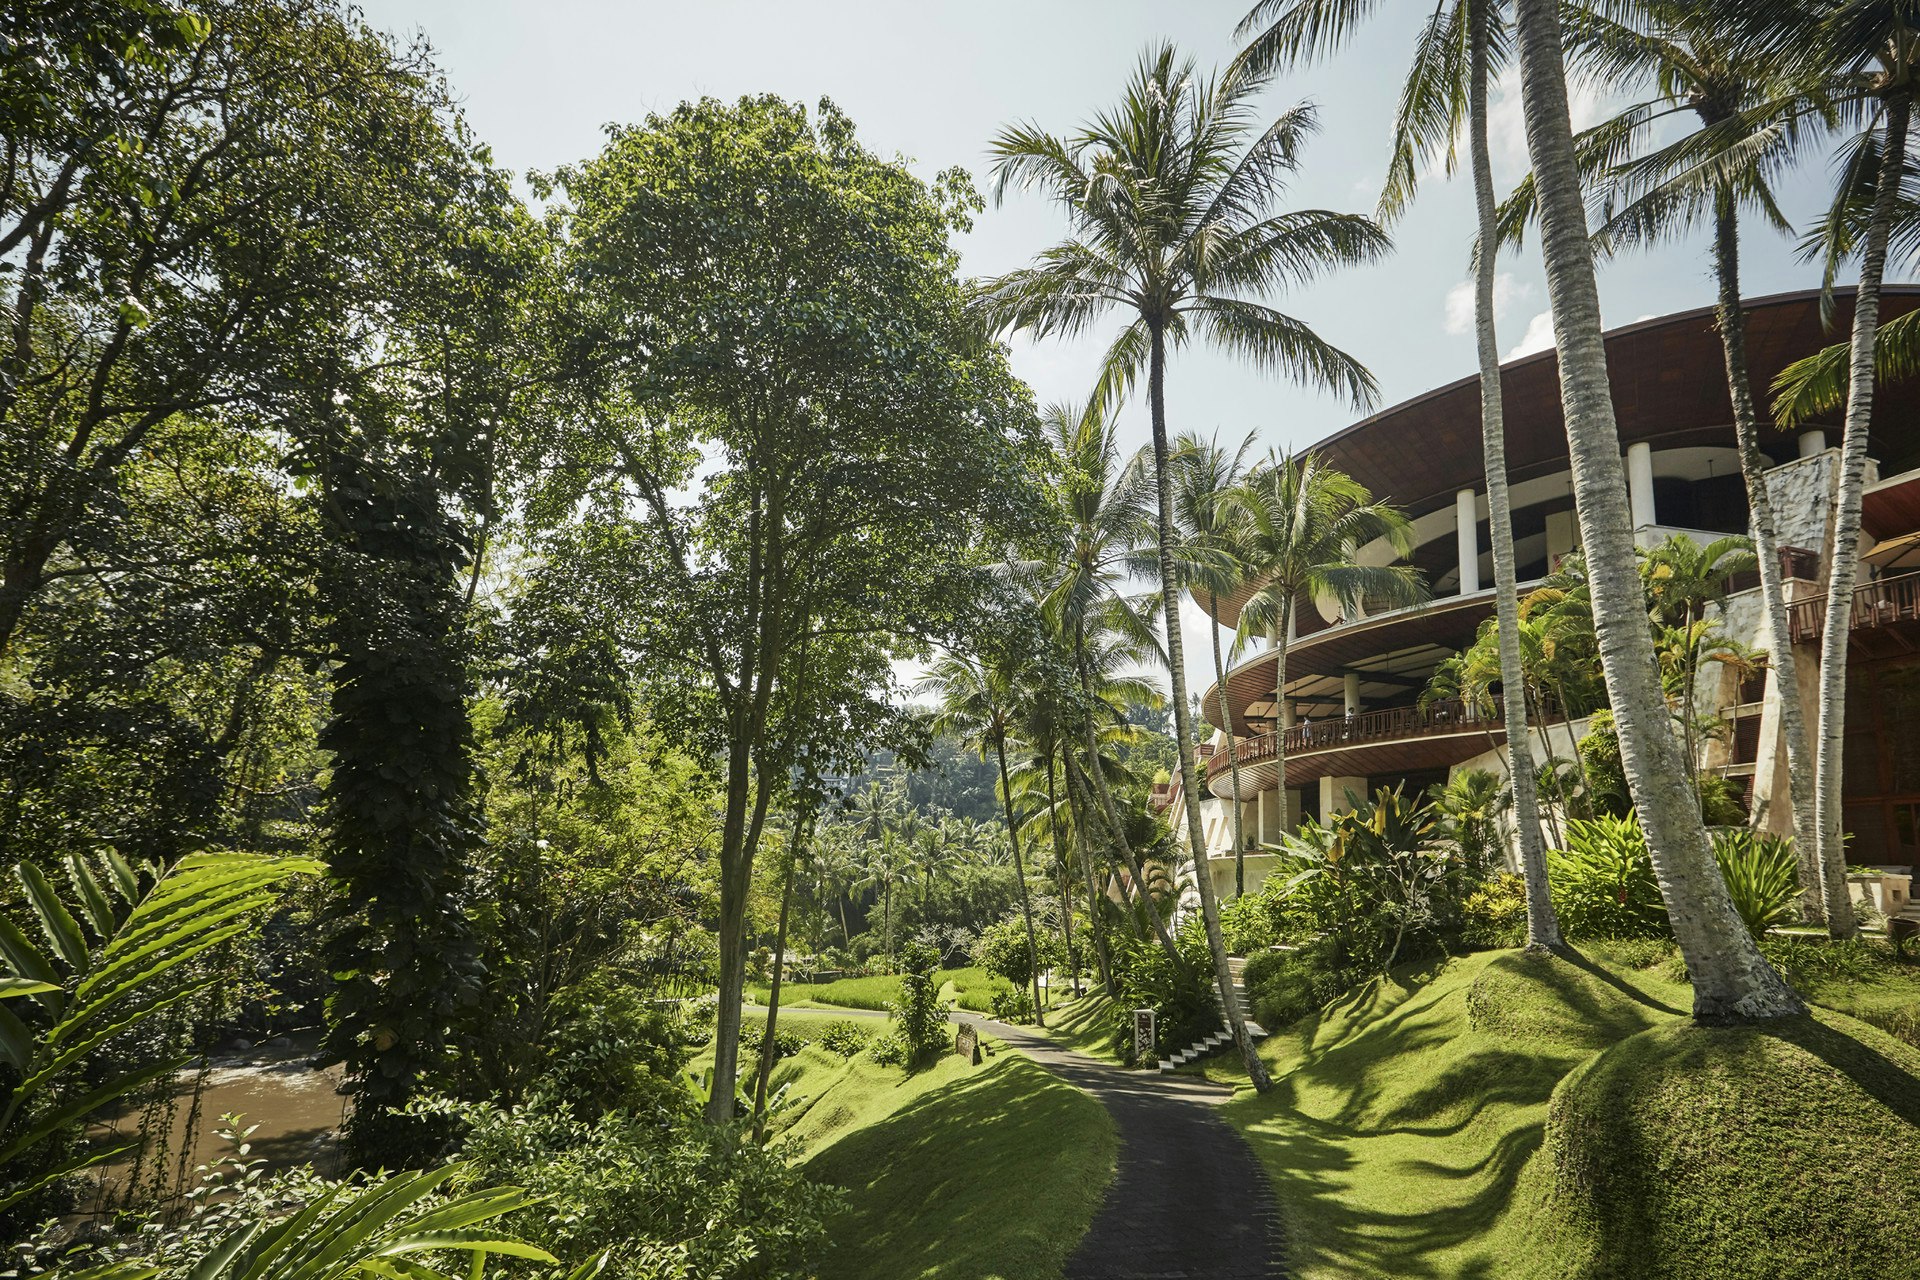 8. The hotel surrounded by jungle foliage.jpg